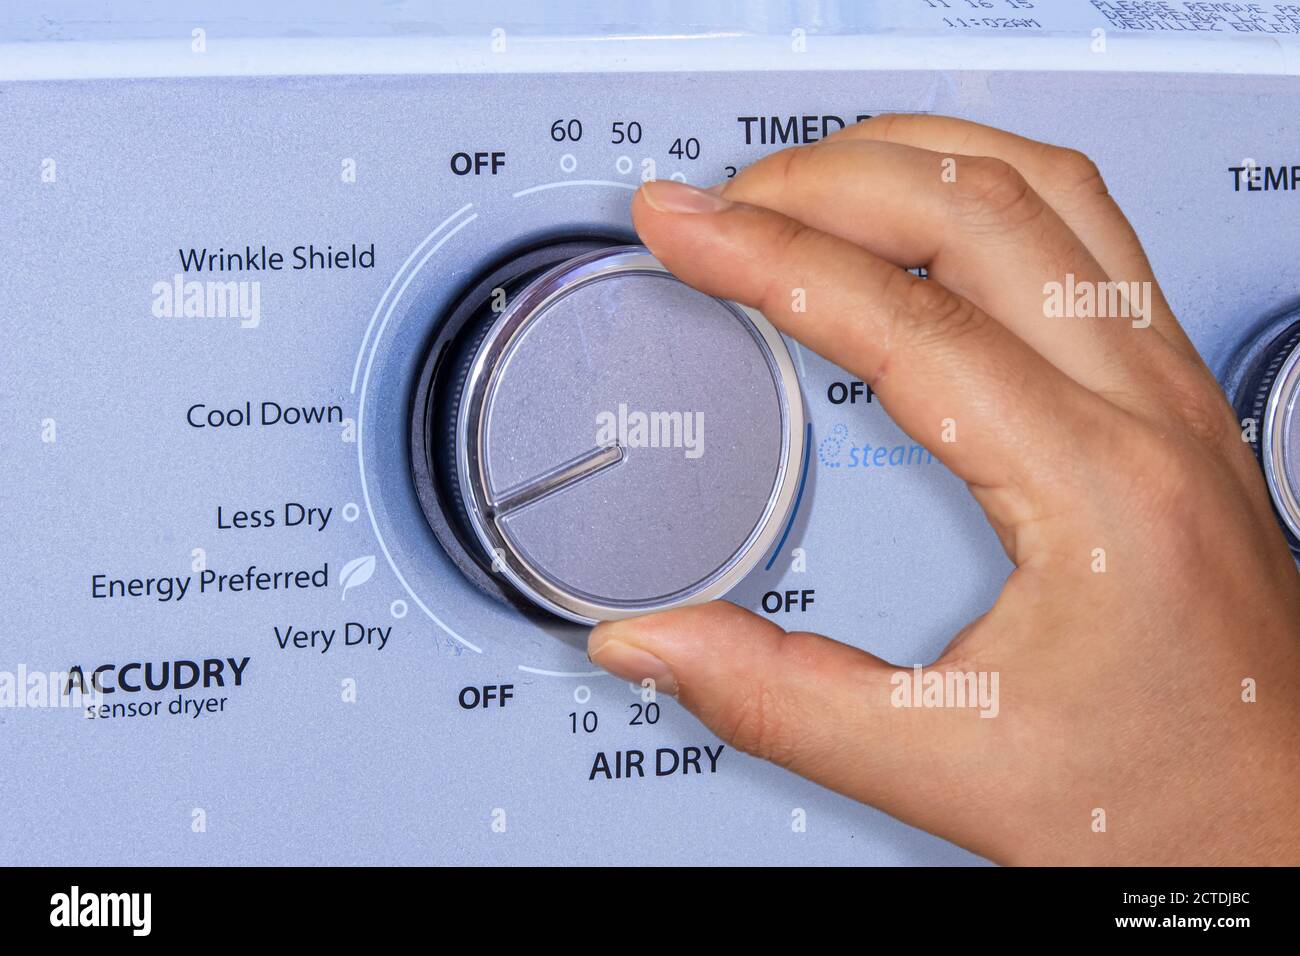 Calgary, Alberta, Canada. Sep 22, 2020.A person drying laundry with a Whirlpool high-efficiency electric dryer that reduce energy consumption. Stock Photo